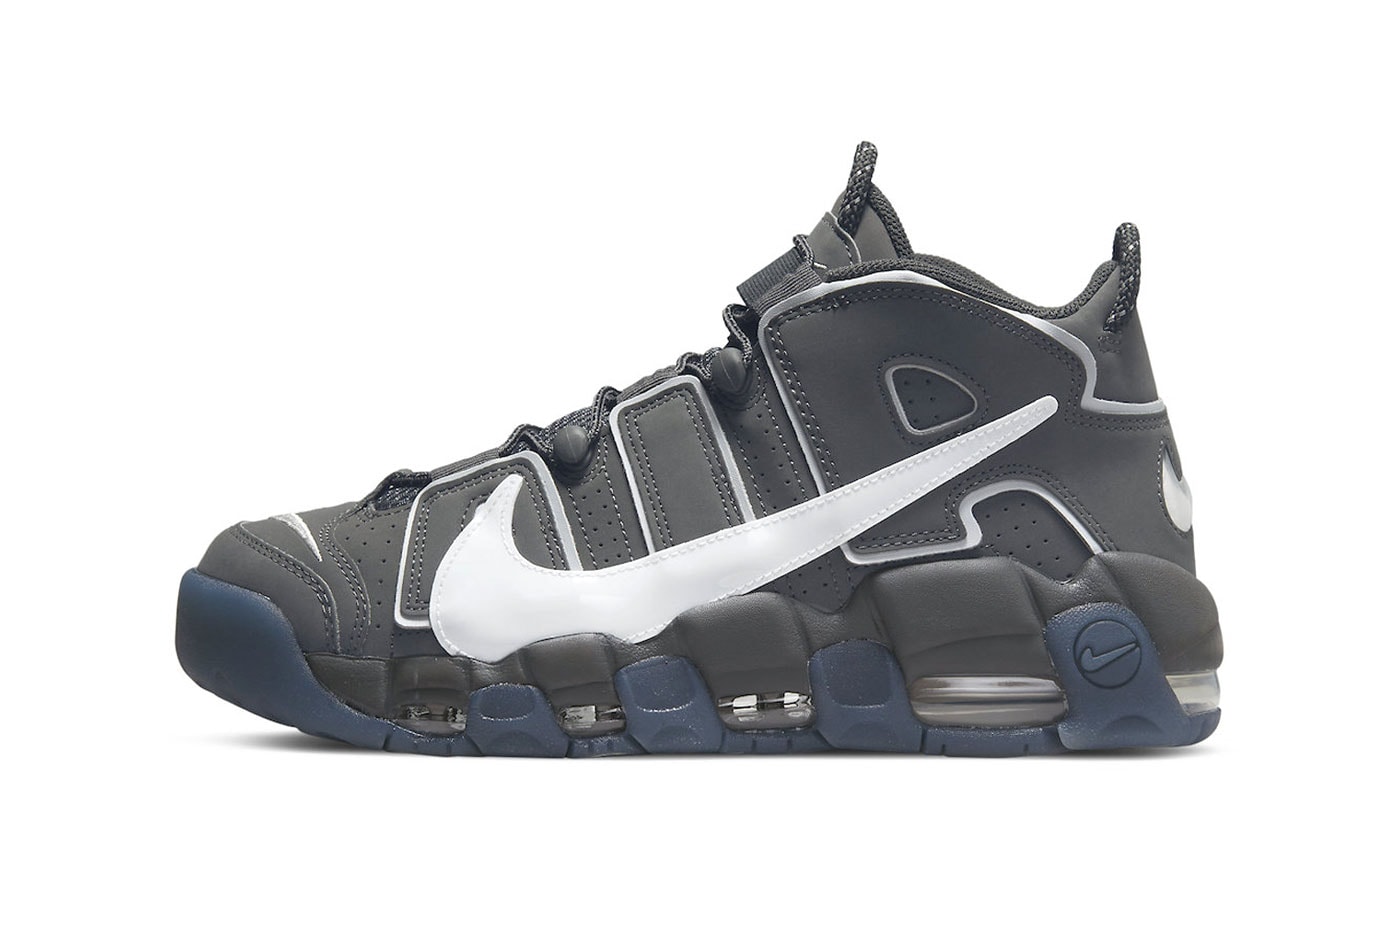 Nike Air More Uptempo Copy Paste patent leather 3m reflective laces Iron Grey White Smoke Grey Anthracite price release info news  